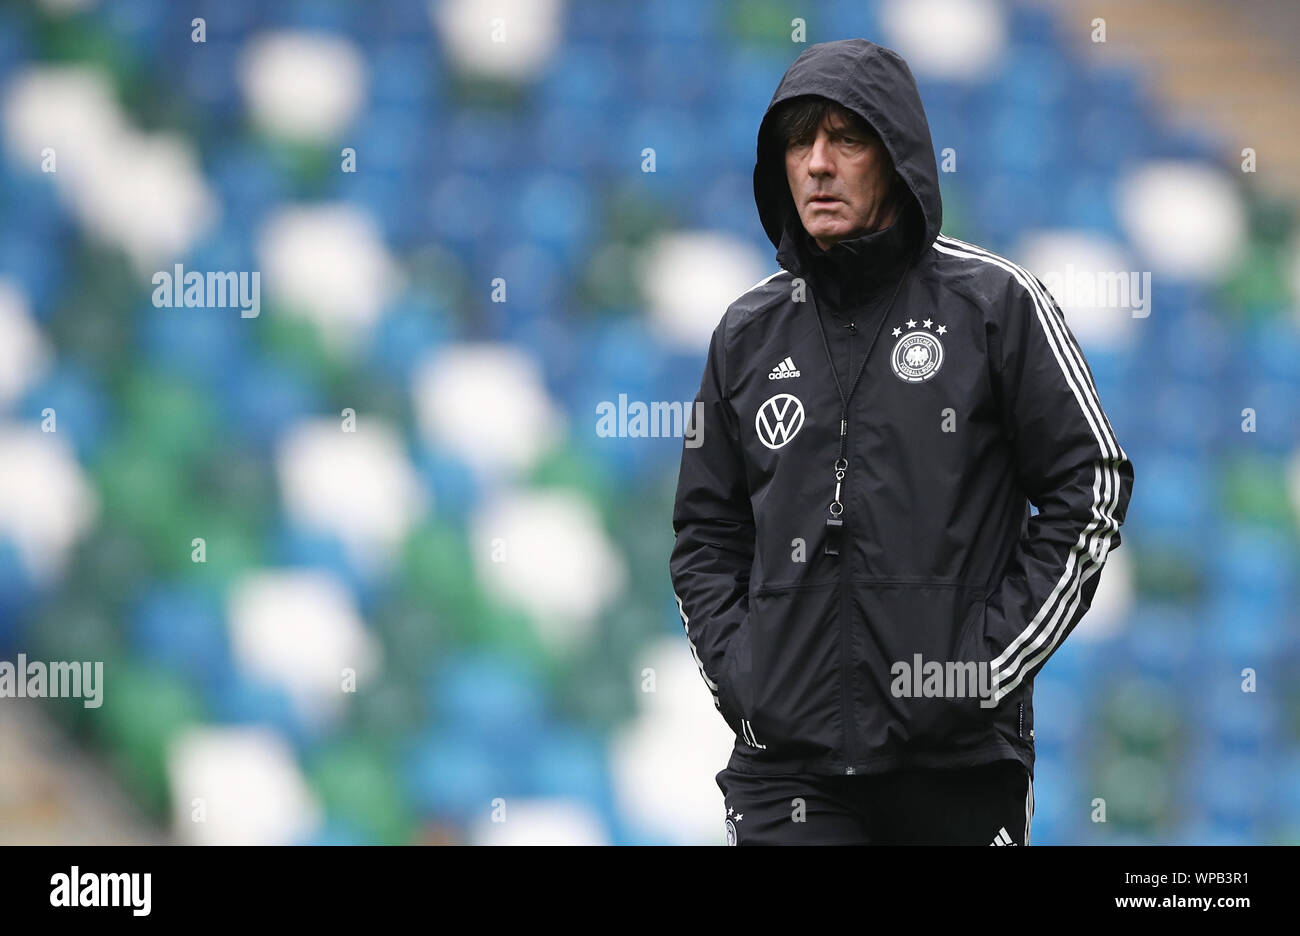 Belfast, UK. 08th Sep, 2019. Soccer: National team, final training Germany before the European Championship qualifier Northern Ireland - Germany in Windsor Park Stadium. National coach Joachim Löw is training on the grass. Credit: Christian Charisius/dpa/Alamy Live News Stock Photo